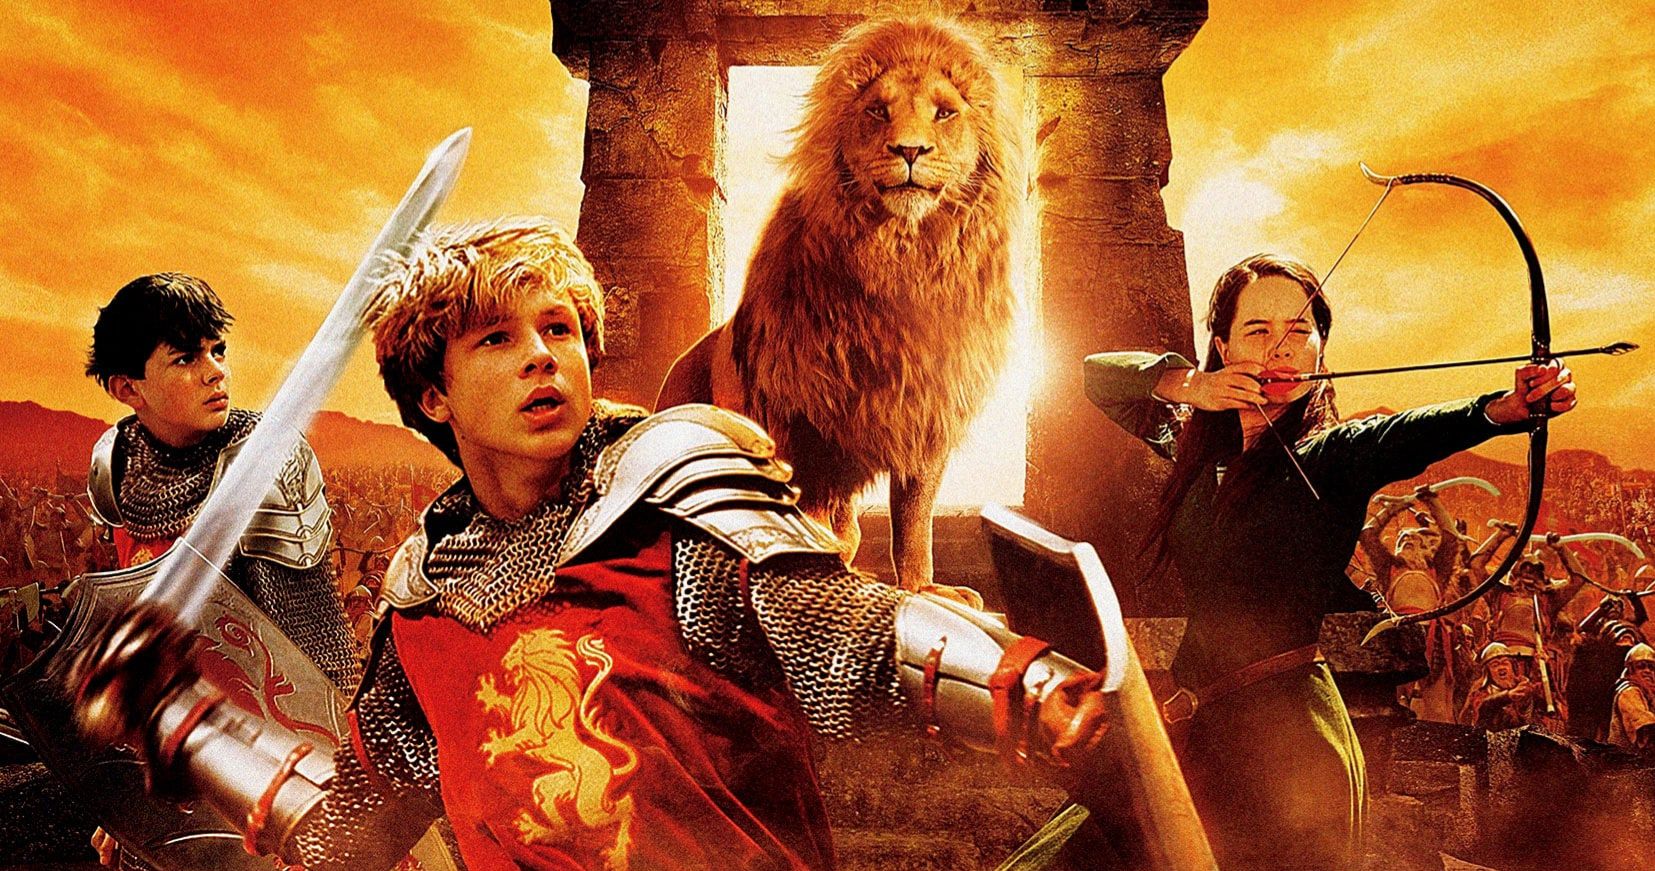 Chronicles of Narnia Producer Wants a Netflix Series Instead of a Movie